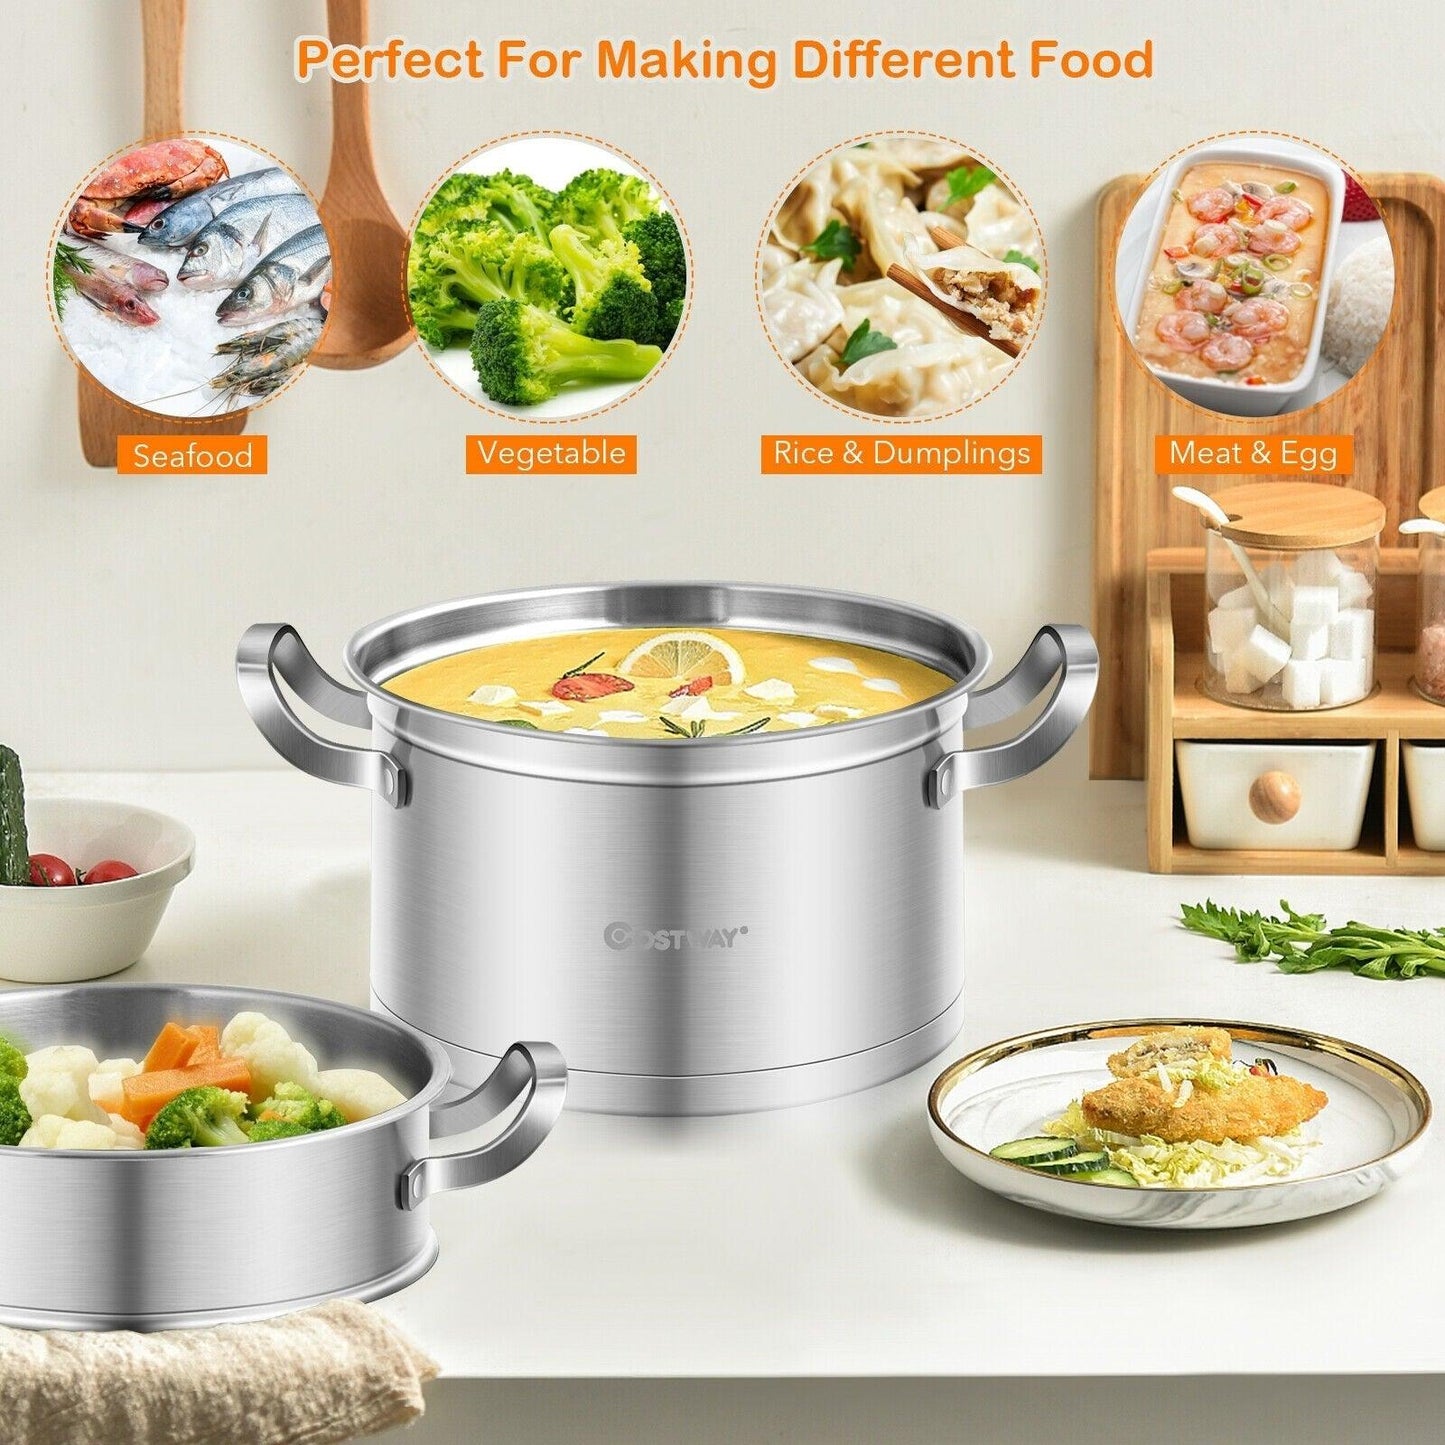 Costway 3 Tier Stainless Steel Steamer Pot 75682419,with Handle - YOURISHOP.COM